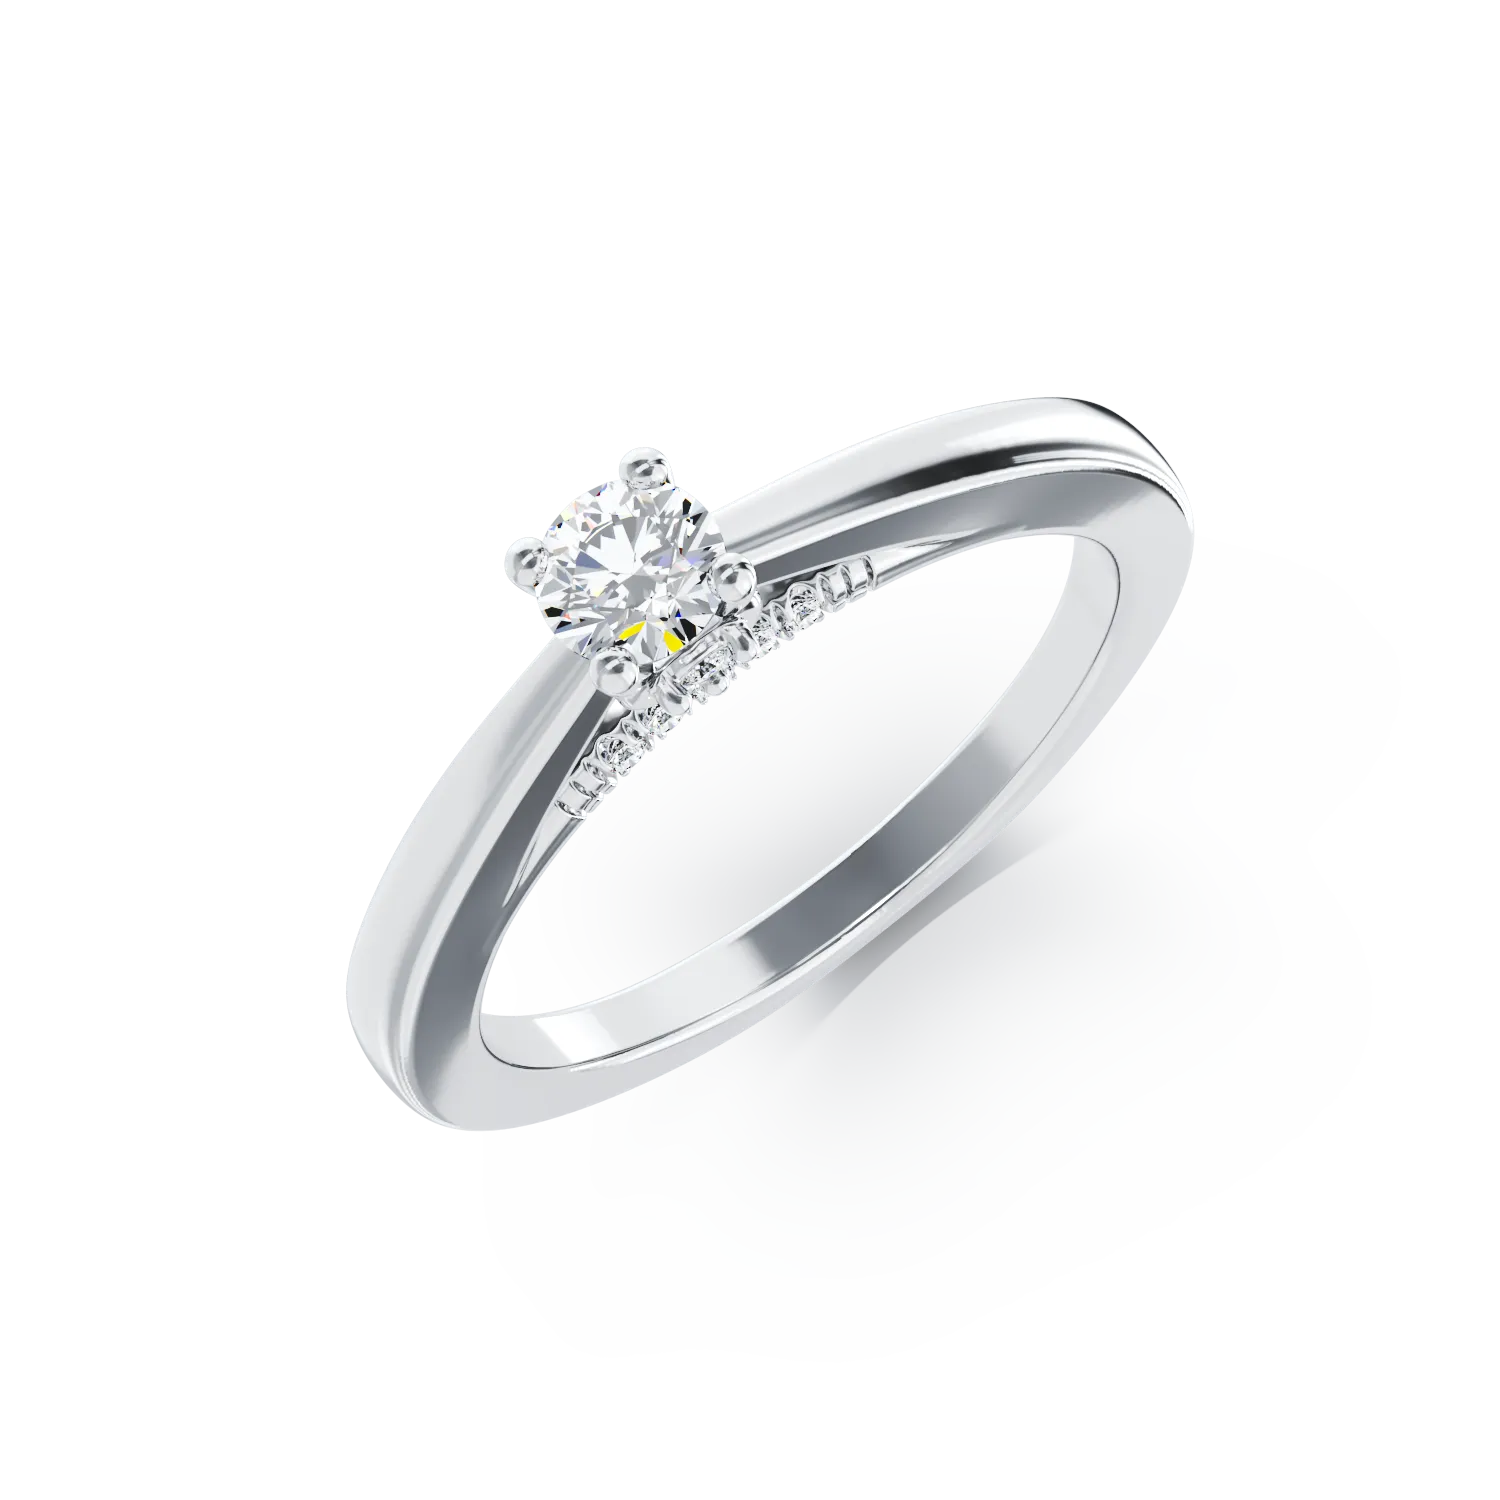 18K white gold engagement ring with 0.19ct diamond and 0.05ct diamond